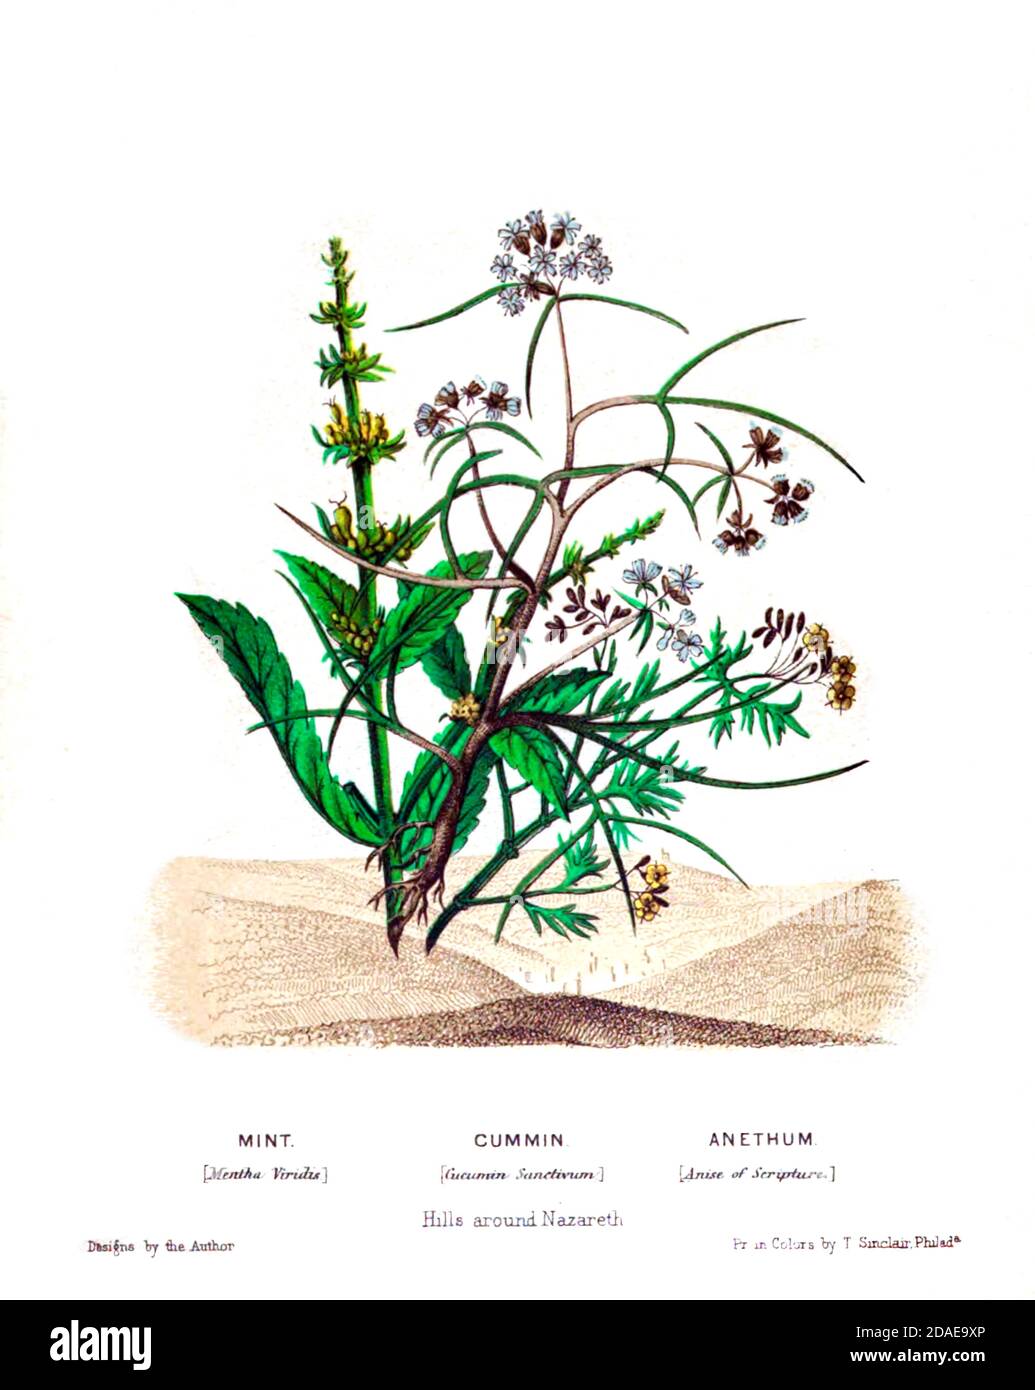 Bouquet of Mint (Mentha viridis), Cummin (Cuminum cyminum), Anethum (Anise) from Plants Of The Holy Land: With Their Fruits And Flowers, Beautifully Illustrated By Original Drawings, Colored From Nature by Rev. Osborn, H. S. (Henry Stafford), 1823-1894 Published in Philadelphia, By J.B. Lippincott & Co. in 1861 Stock Photo